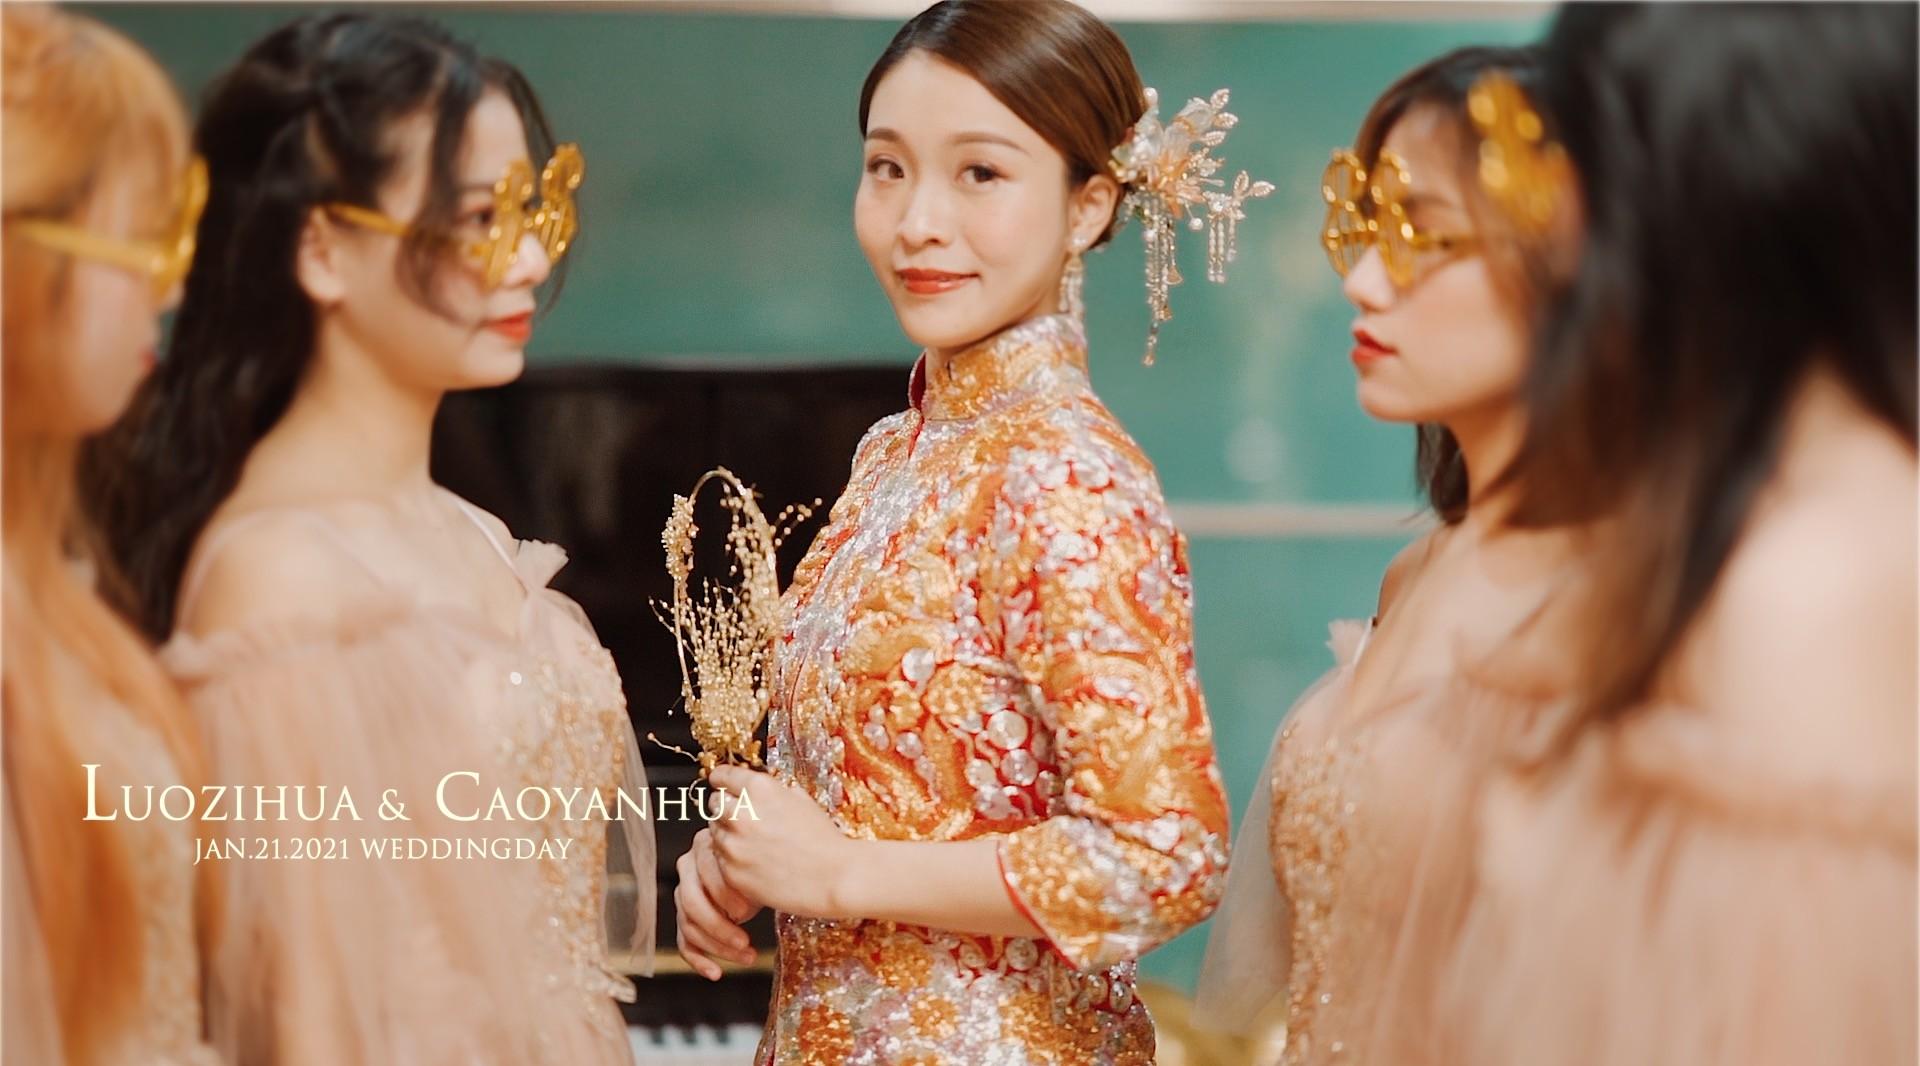 Luo & Cao 2021.1.21·婚礼快剪 | Marchfilm出品